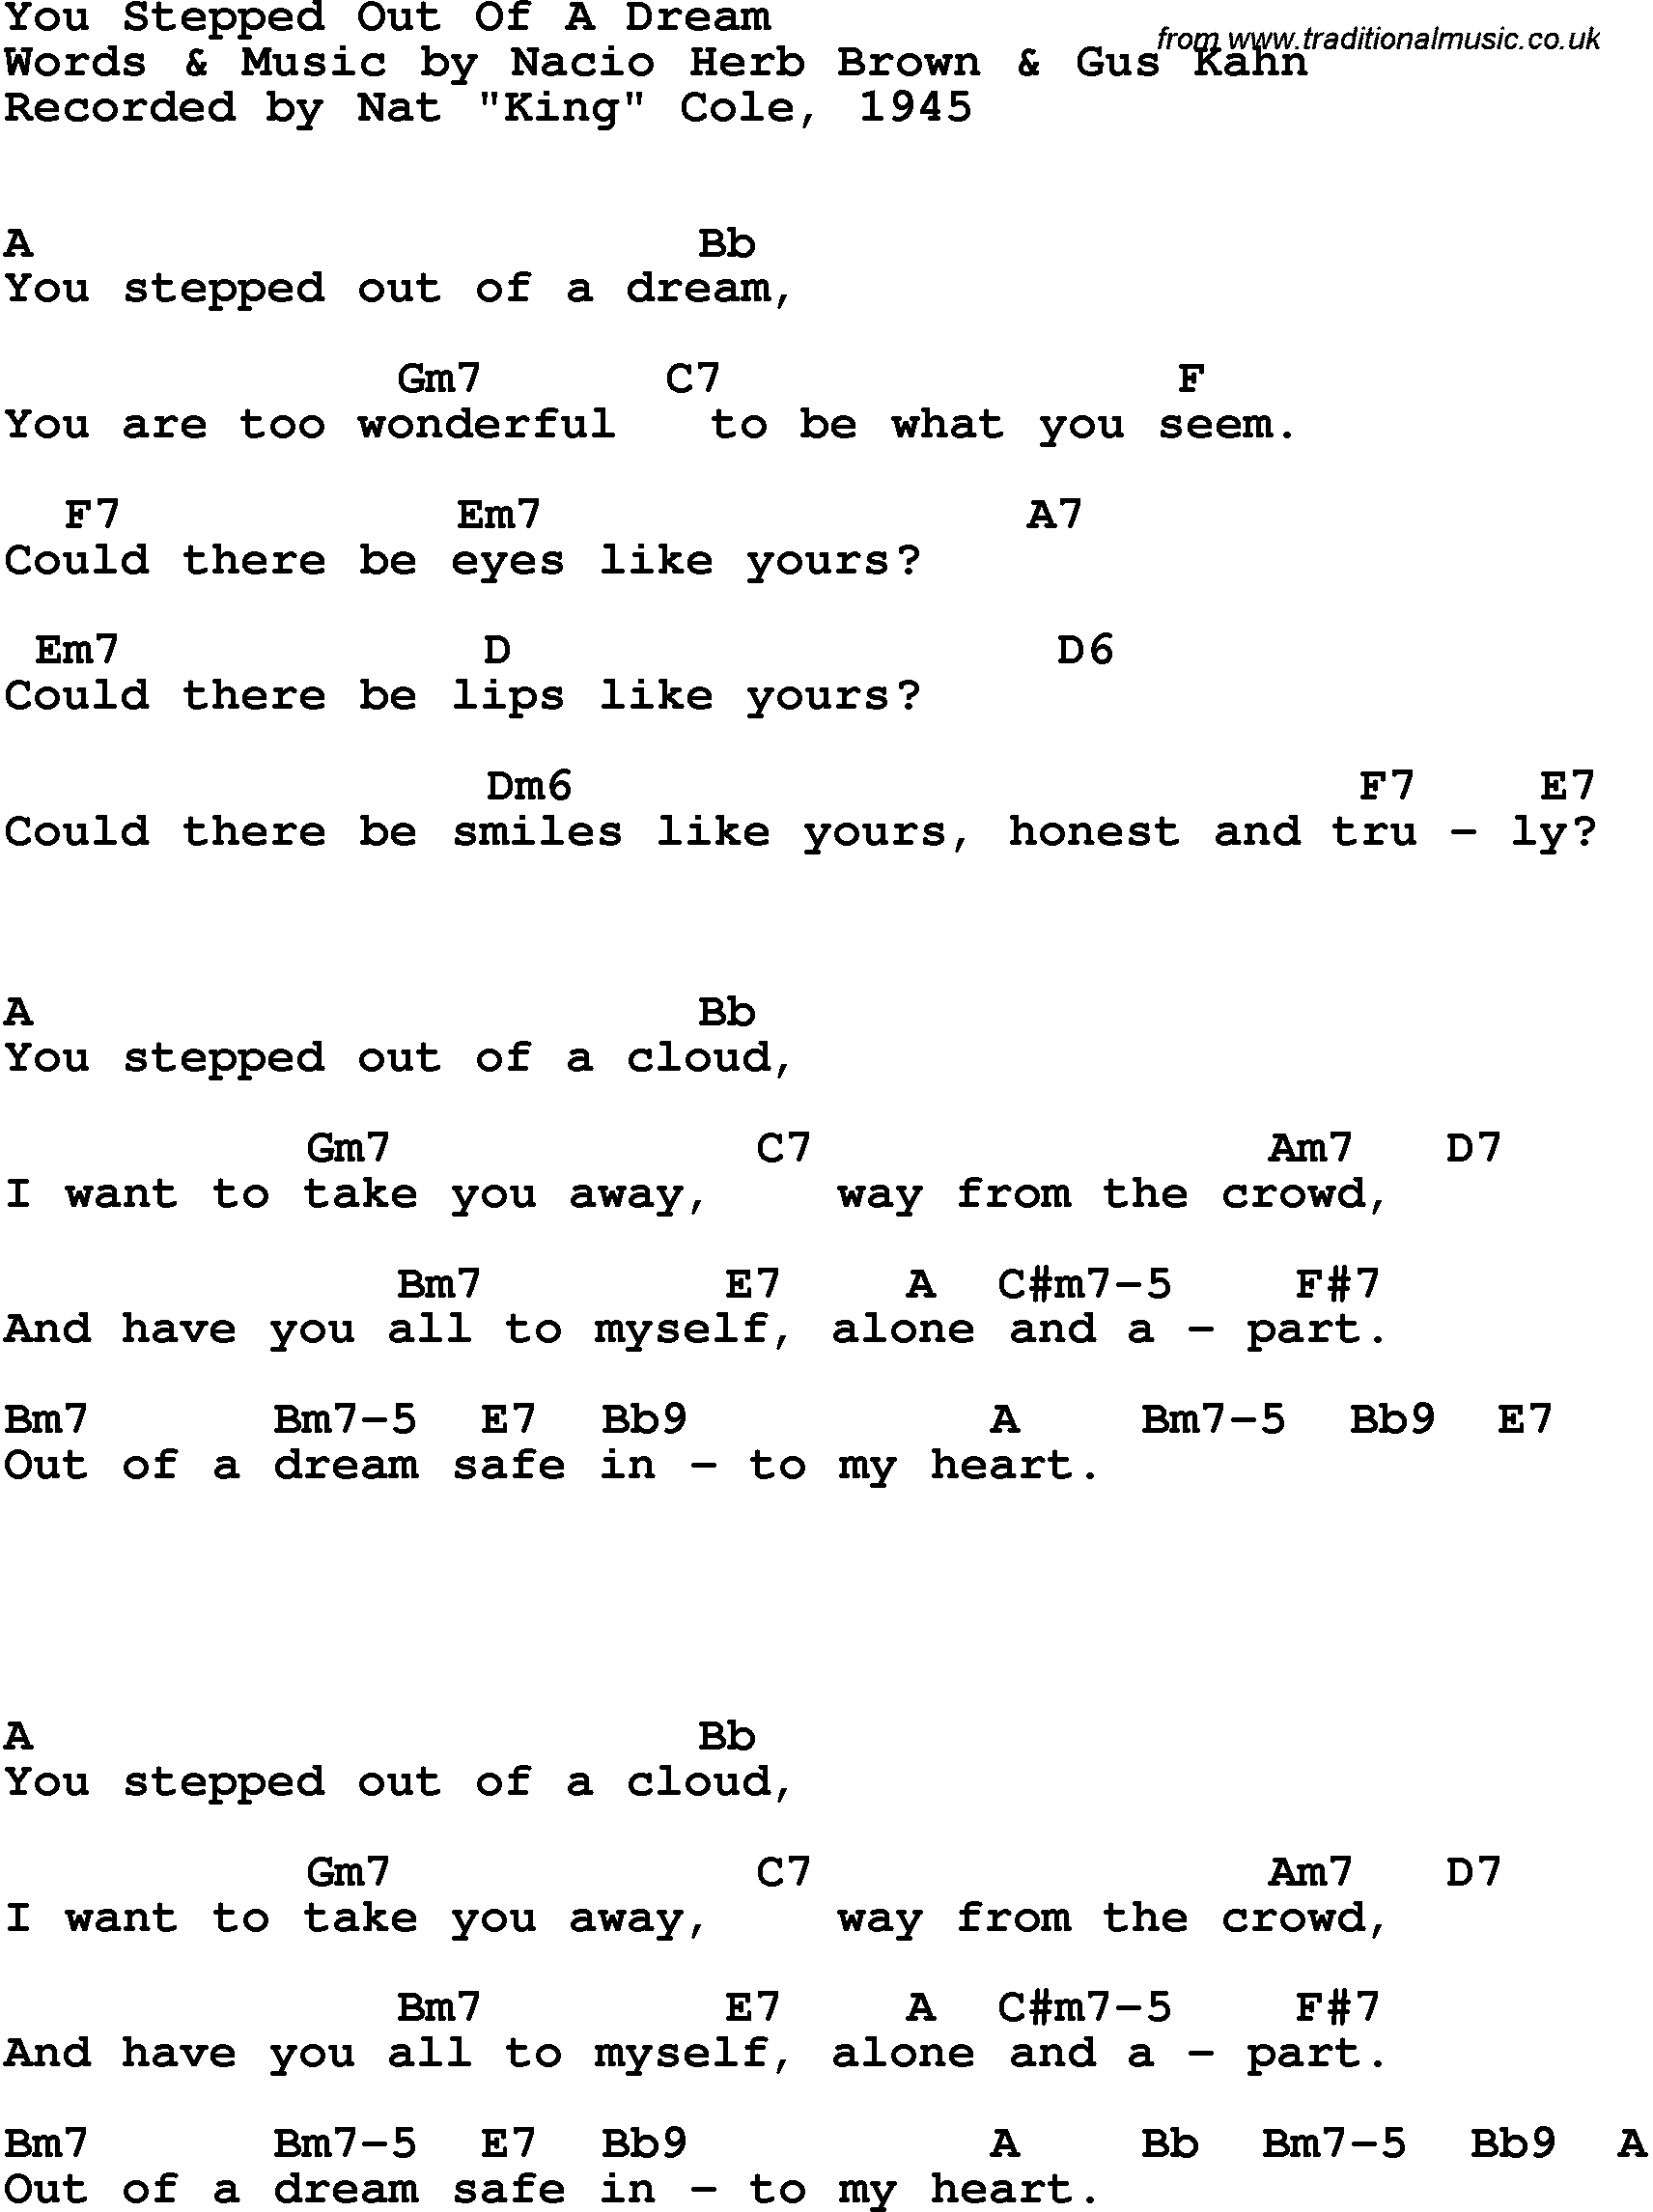 Song Lyrics with guitar chords for You Stepped Out Of A Dream - Nat King Cole, 1945